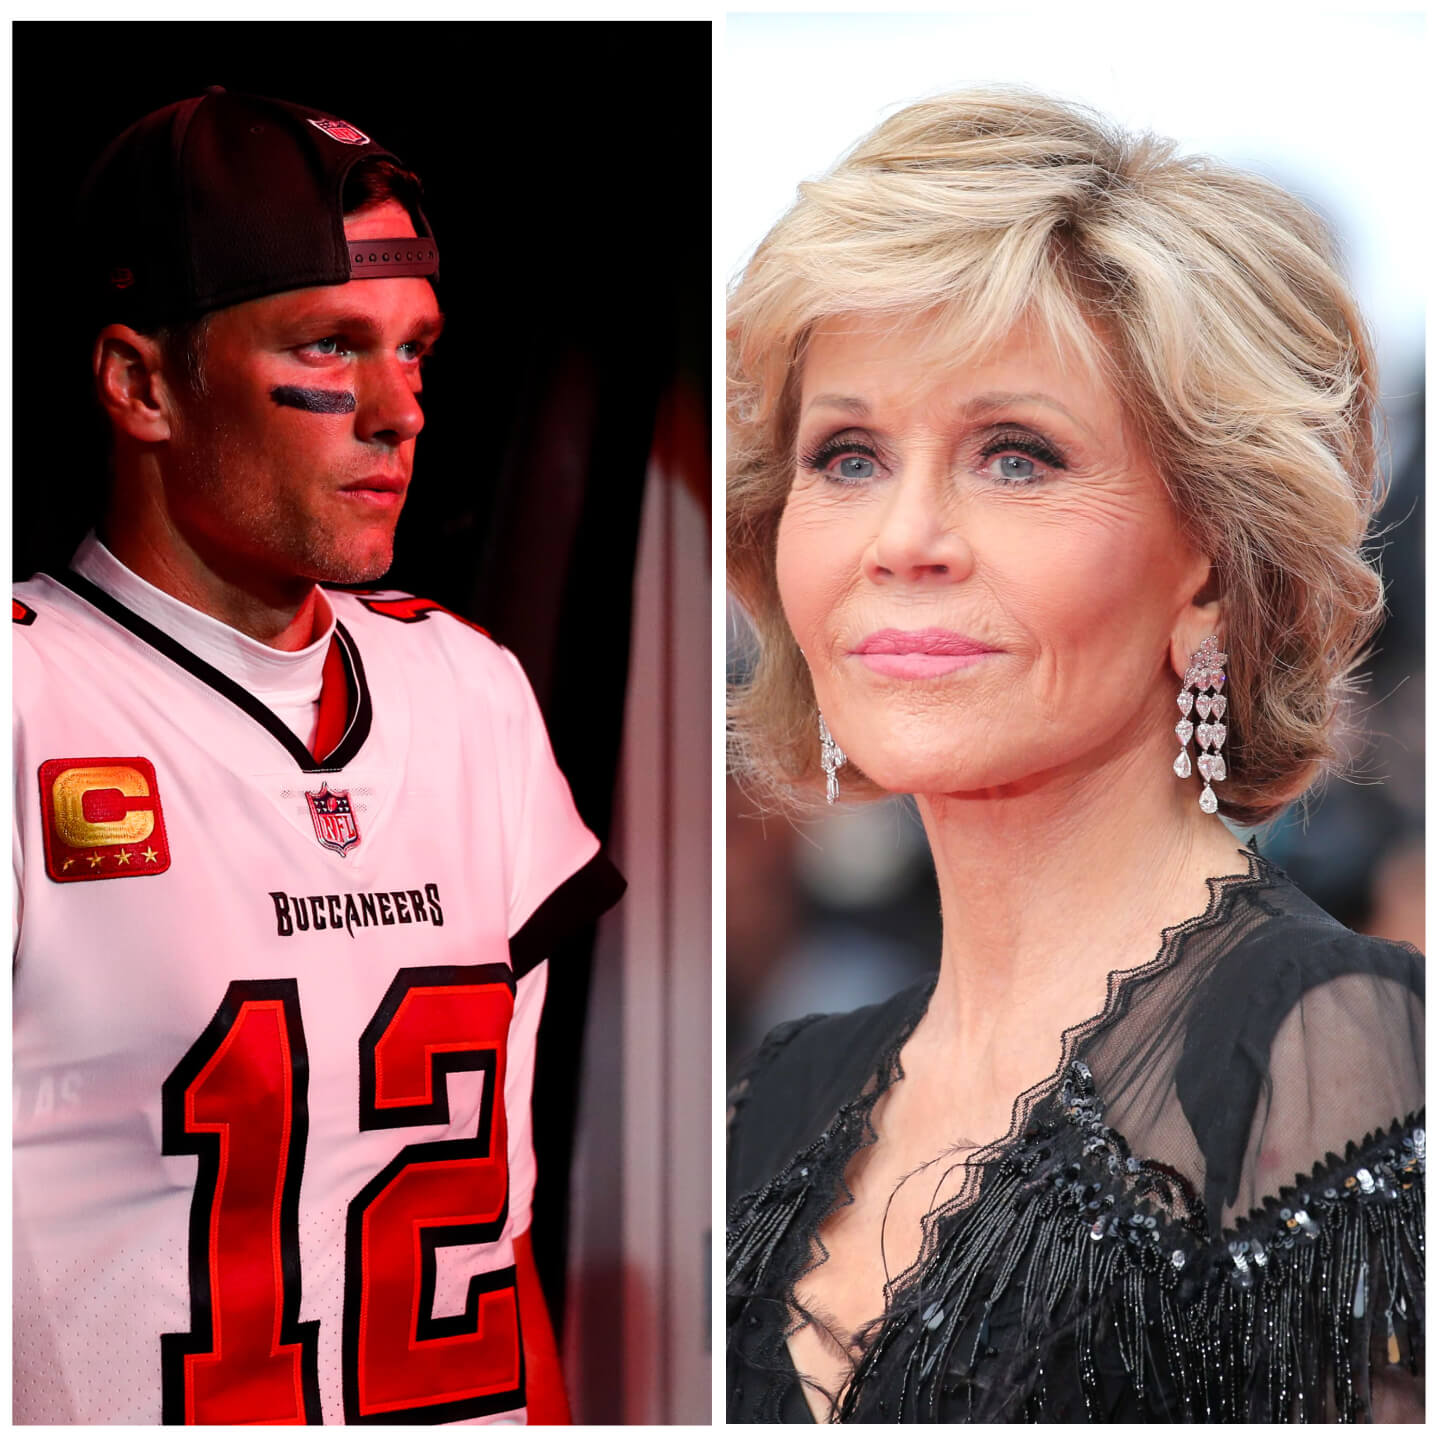 Tom Brady and Jane Fonda in side-by-side pictures.